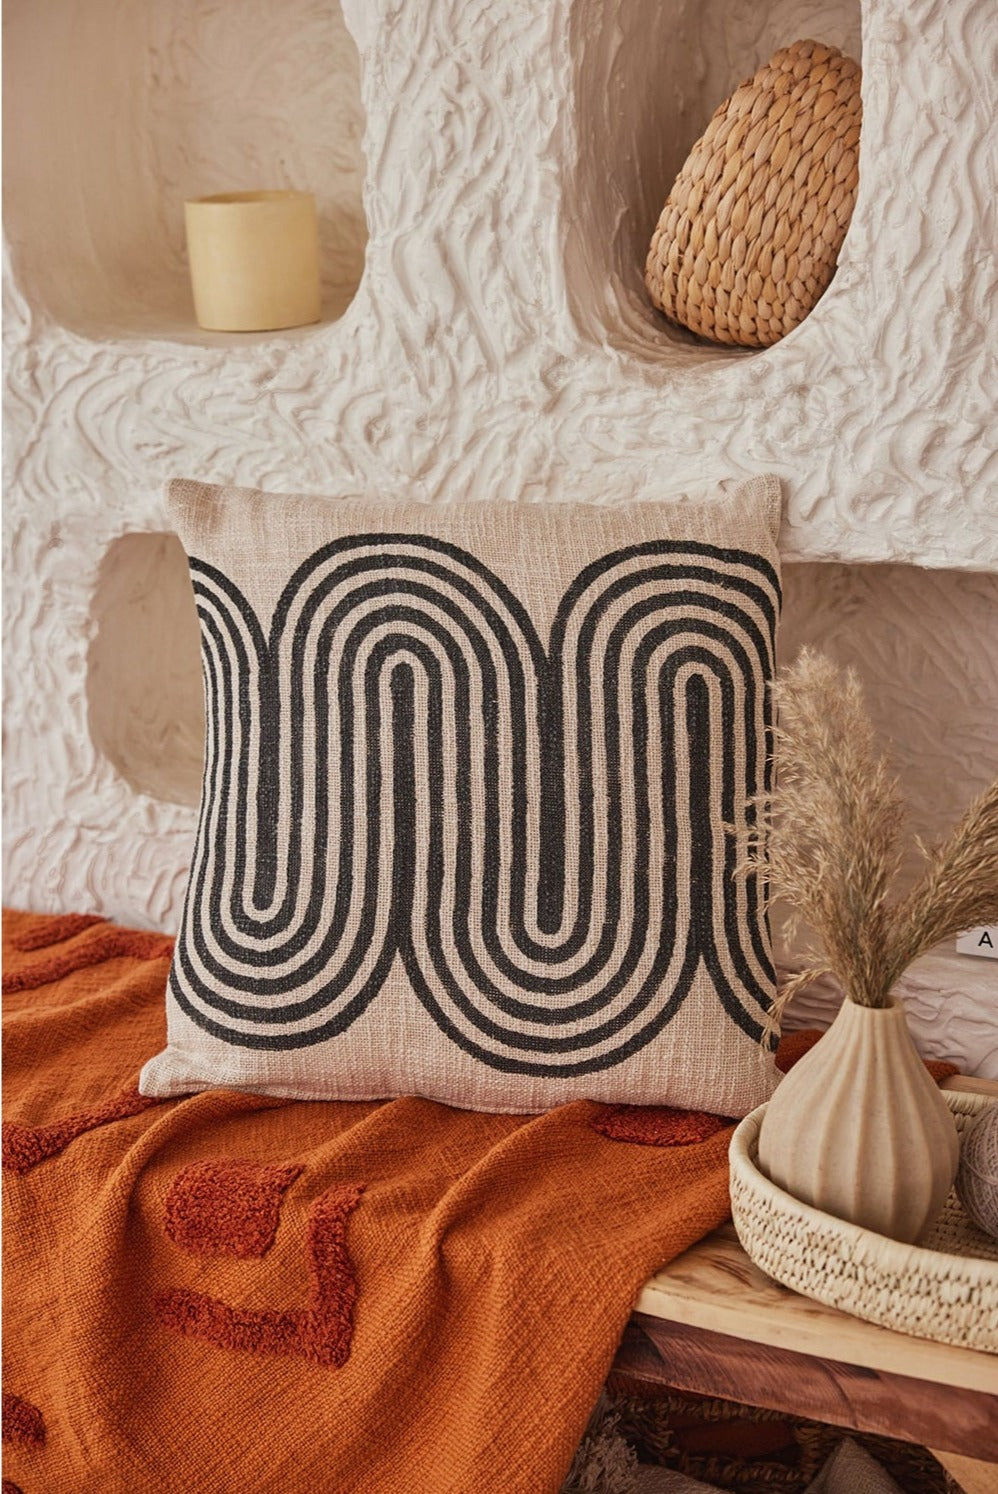 Handprinted pillow using blocks by talented artisans, you can be assured of the level of quality and care that goes into the design. The artisans use traditional hand block printing techniques to bring you a colorful, modern design with a global feel. Ethically made in India.